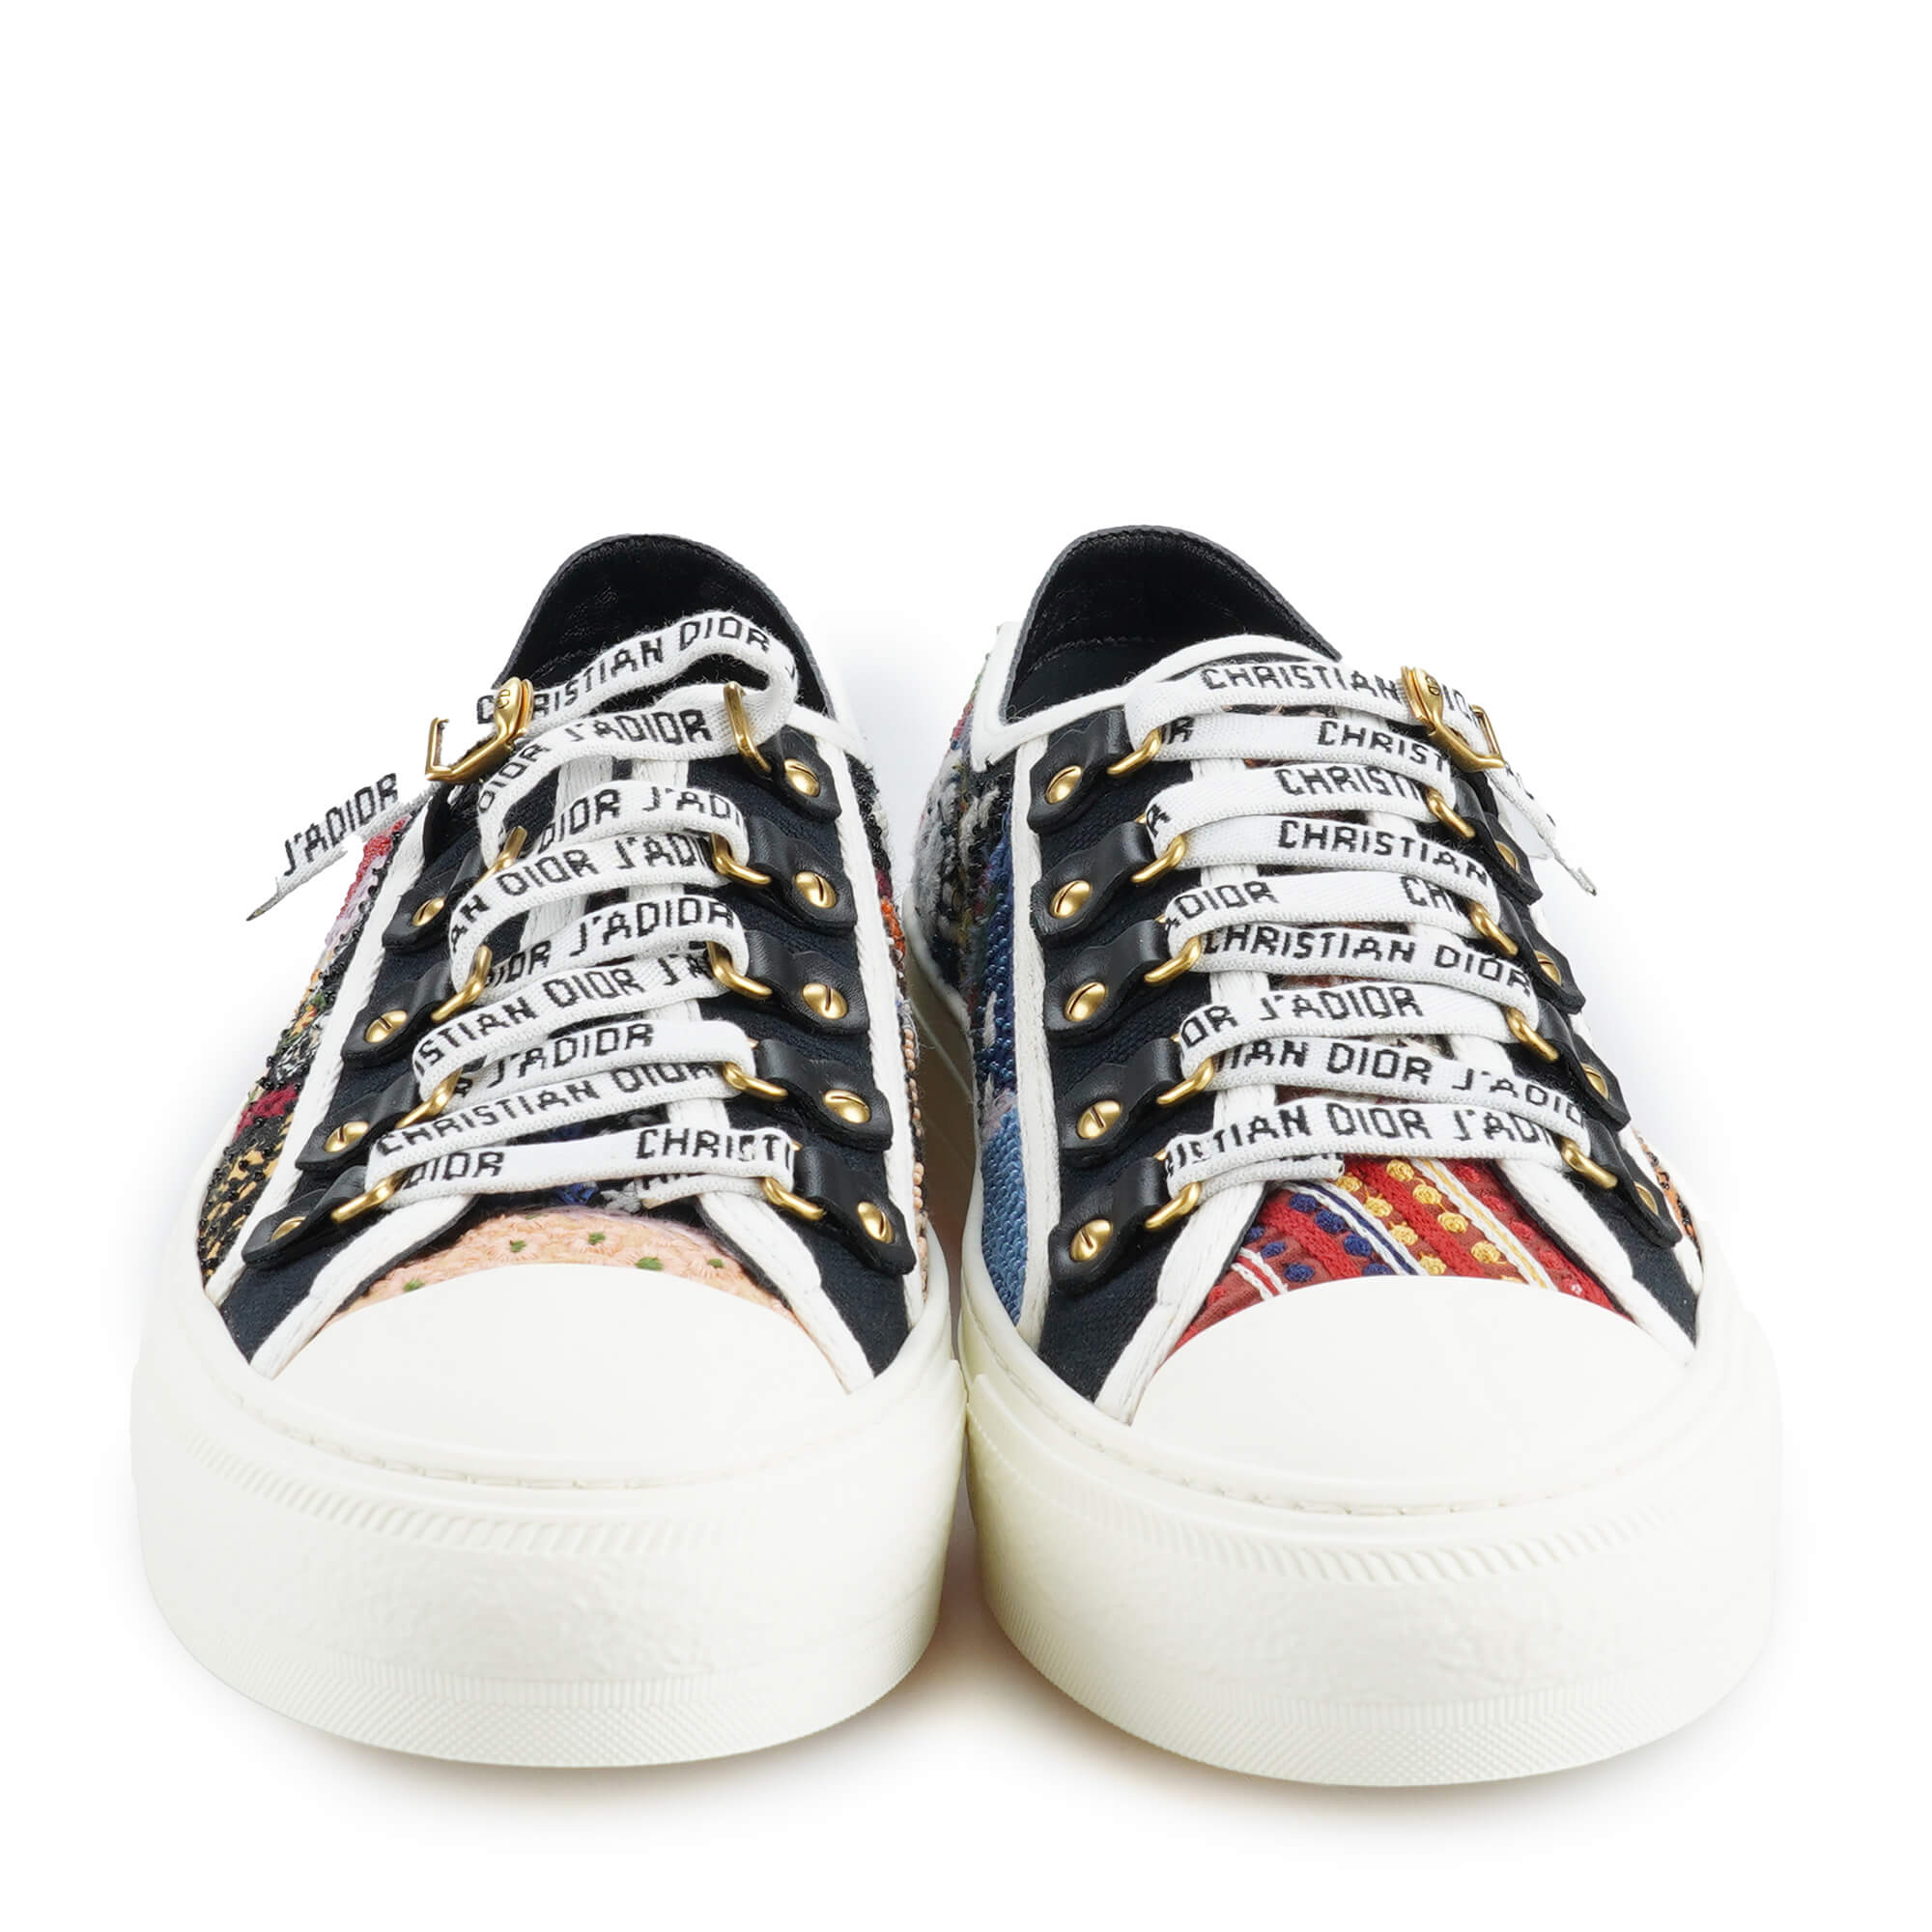 Christian Dior - Dioramour Beaded Patchwork Walk'n Dior Sneakers 